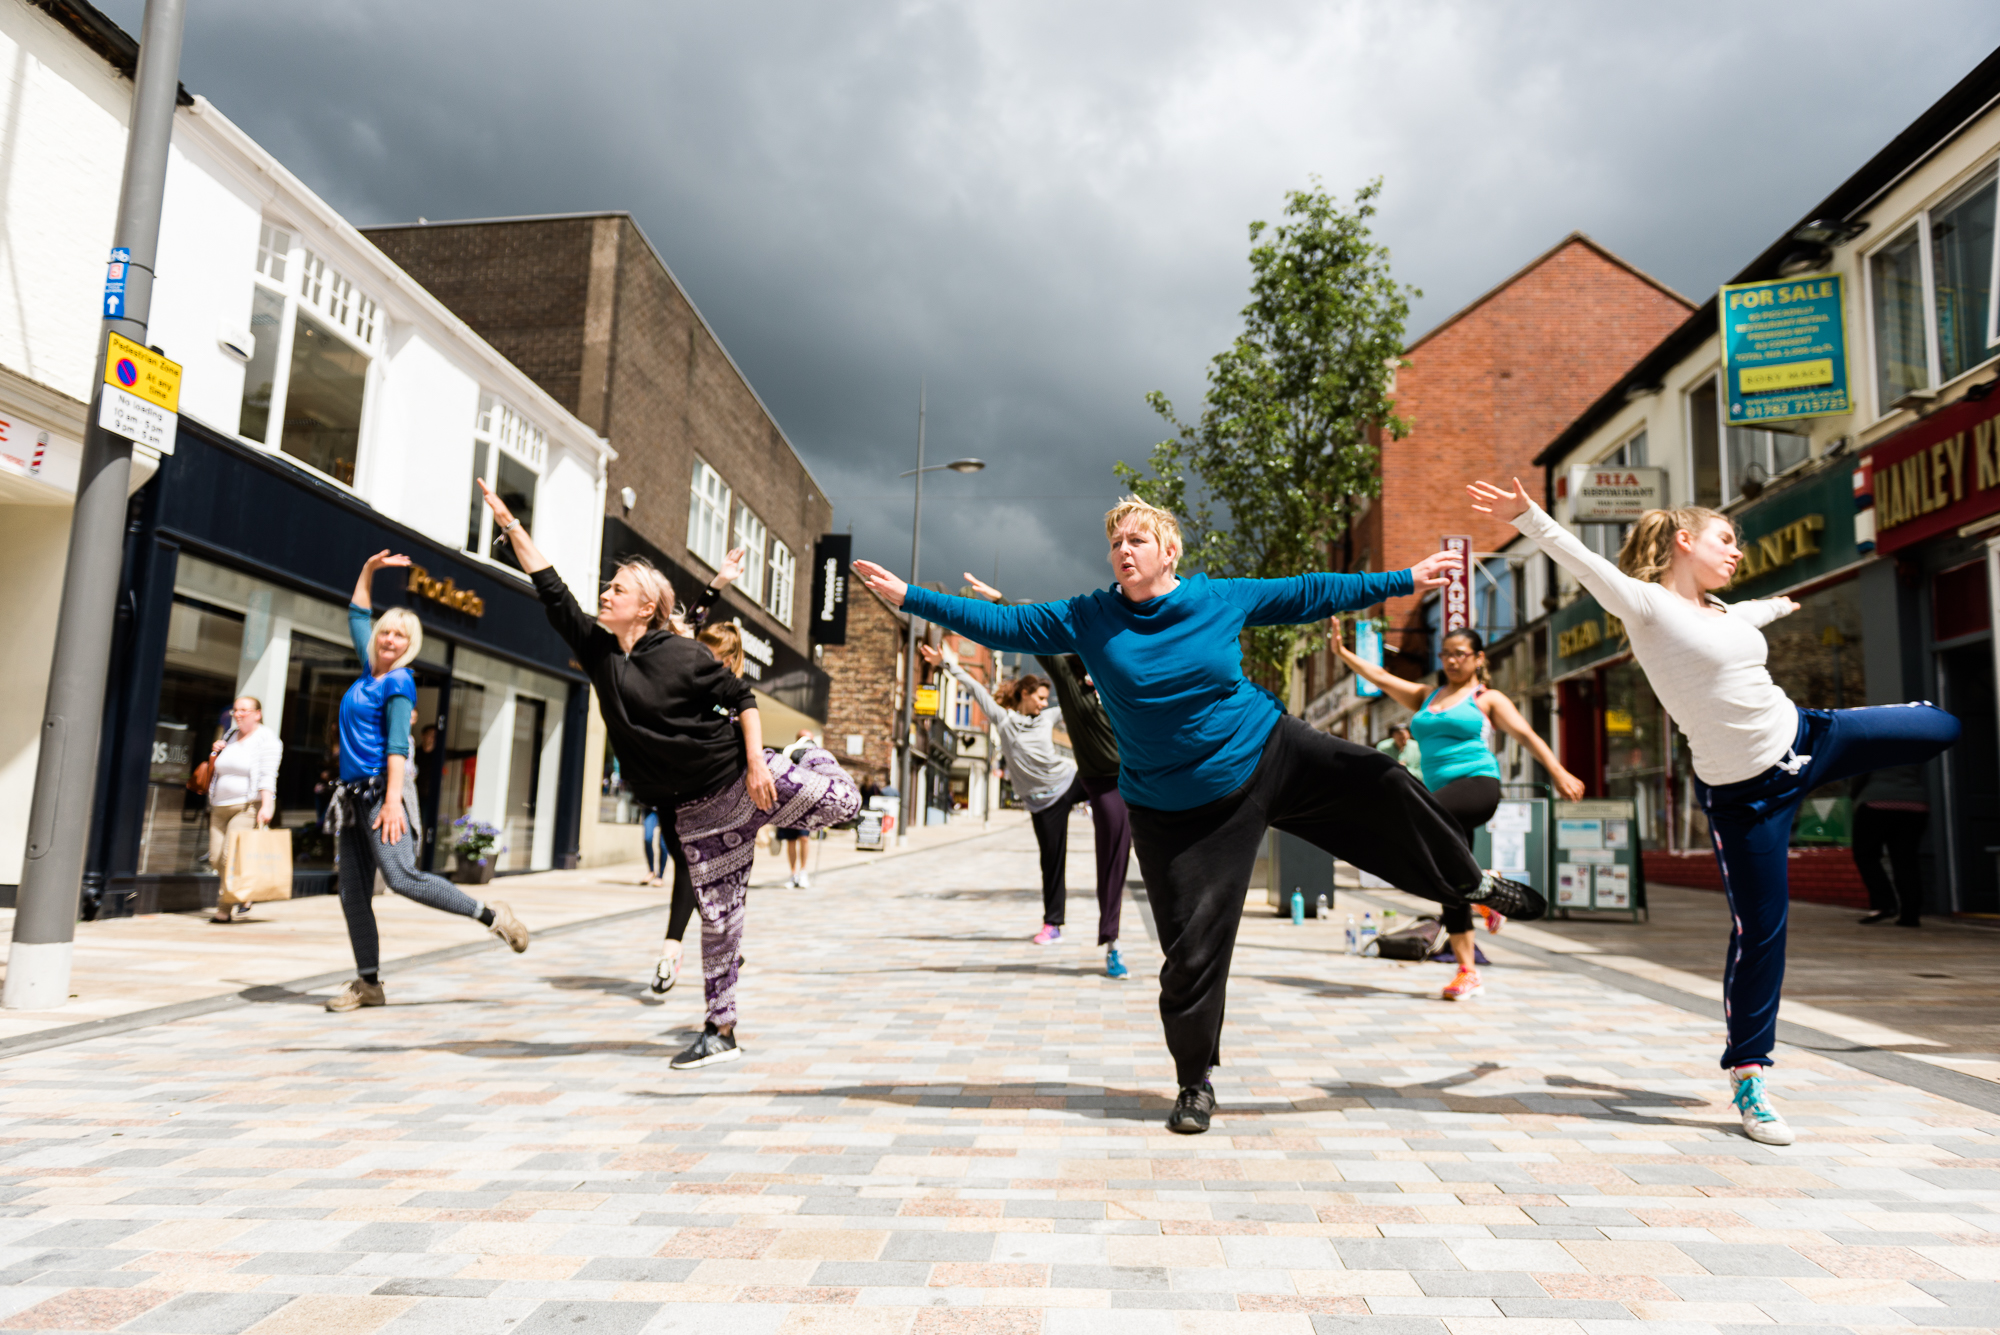 Restoke - Big Dance Rehearsal - Dance Fridays - Dancing in the Street - The Regent Theatre,  Picadilly, Hanley - Documentary Photography by Jenny Harper-14.jpg